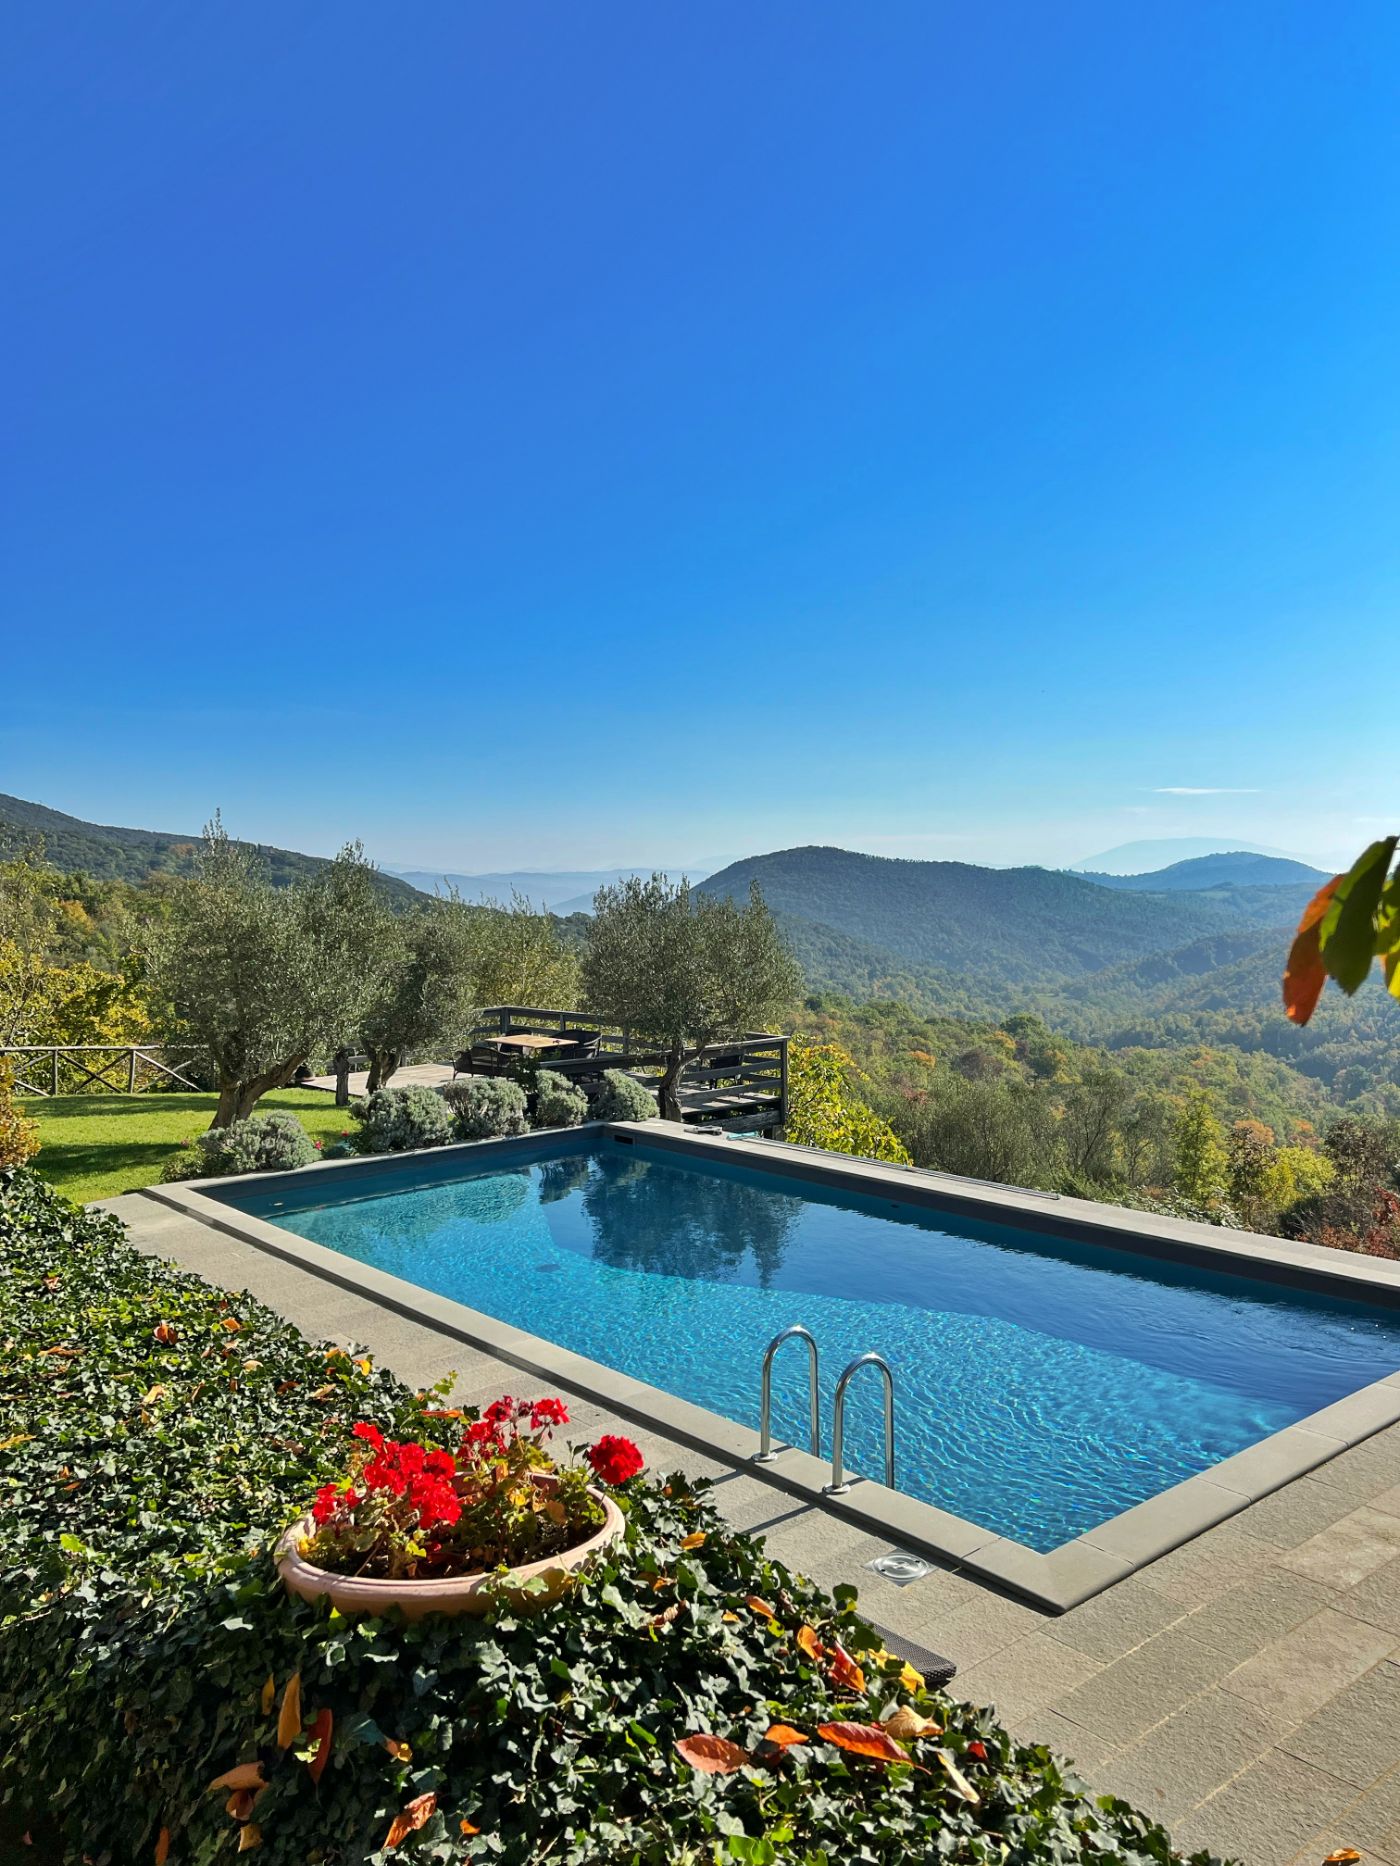 The pool on a sunny day overlooking hill views at Villa Pizzicato